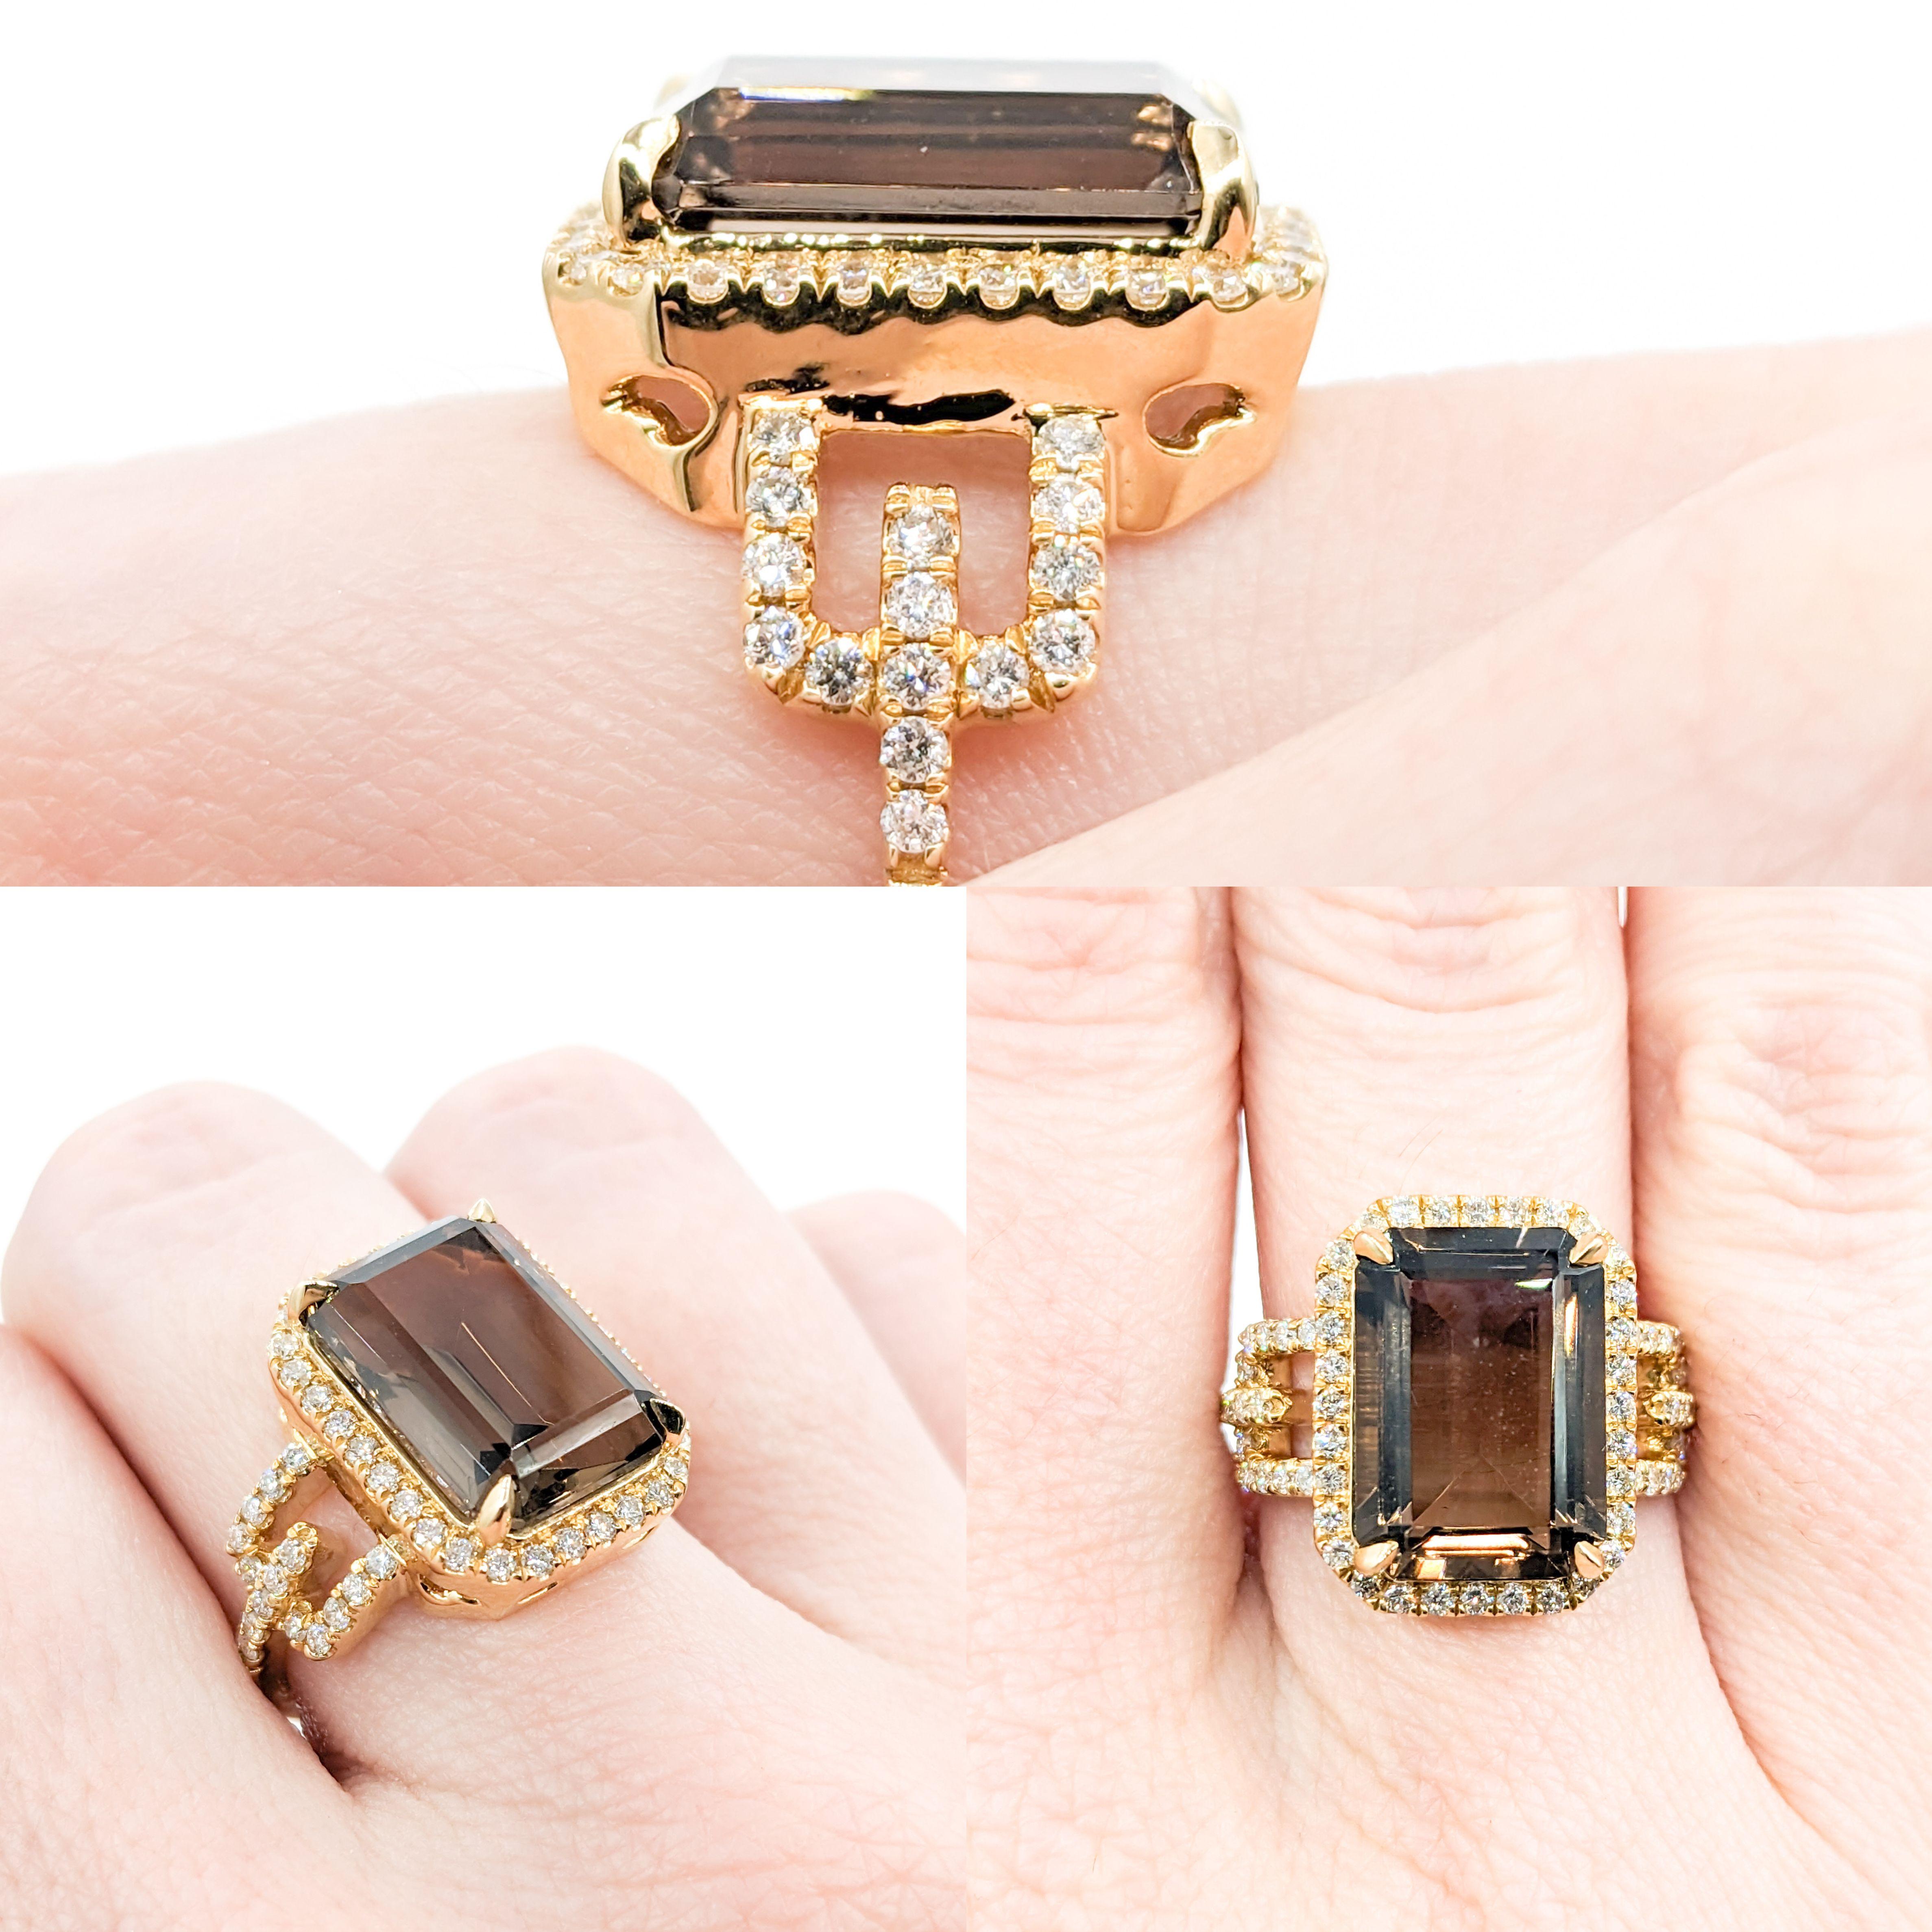 6.66ct Smoky Quartz & Diamond Ring In Yellow Gold

Embrace elegance with this gorgeous Smoky Quartz ring, delicately crafted in 14k yellow gold. This show-stopping ring boasts a magnificent 6.66 carat smokey quartz at its heart. The stone has a